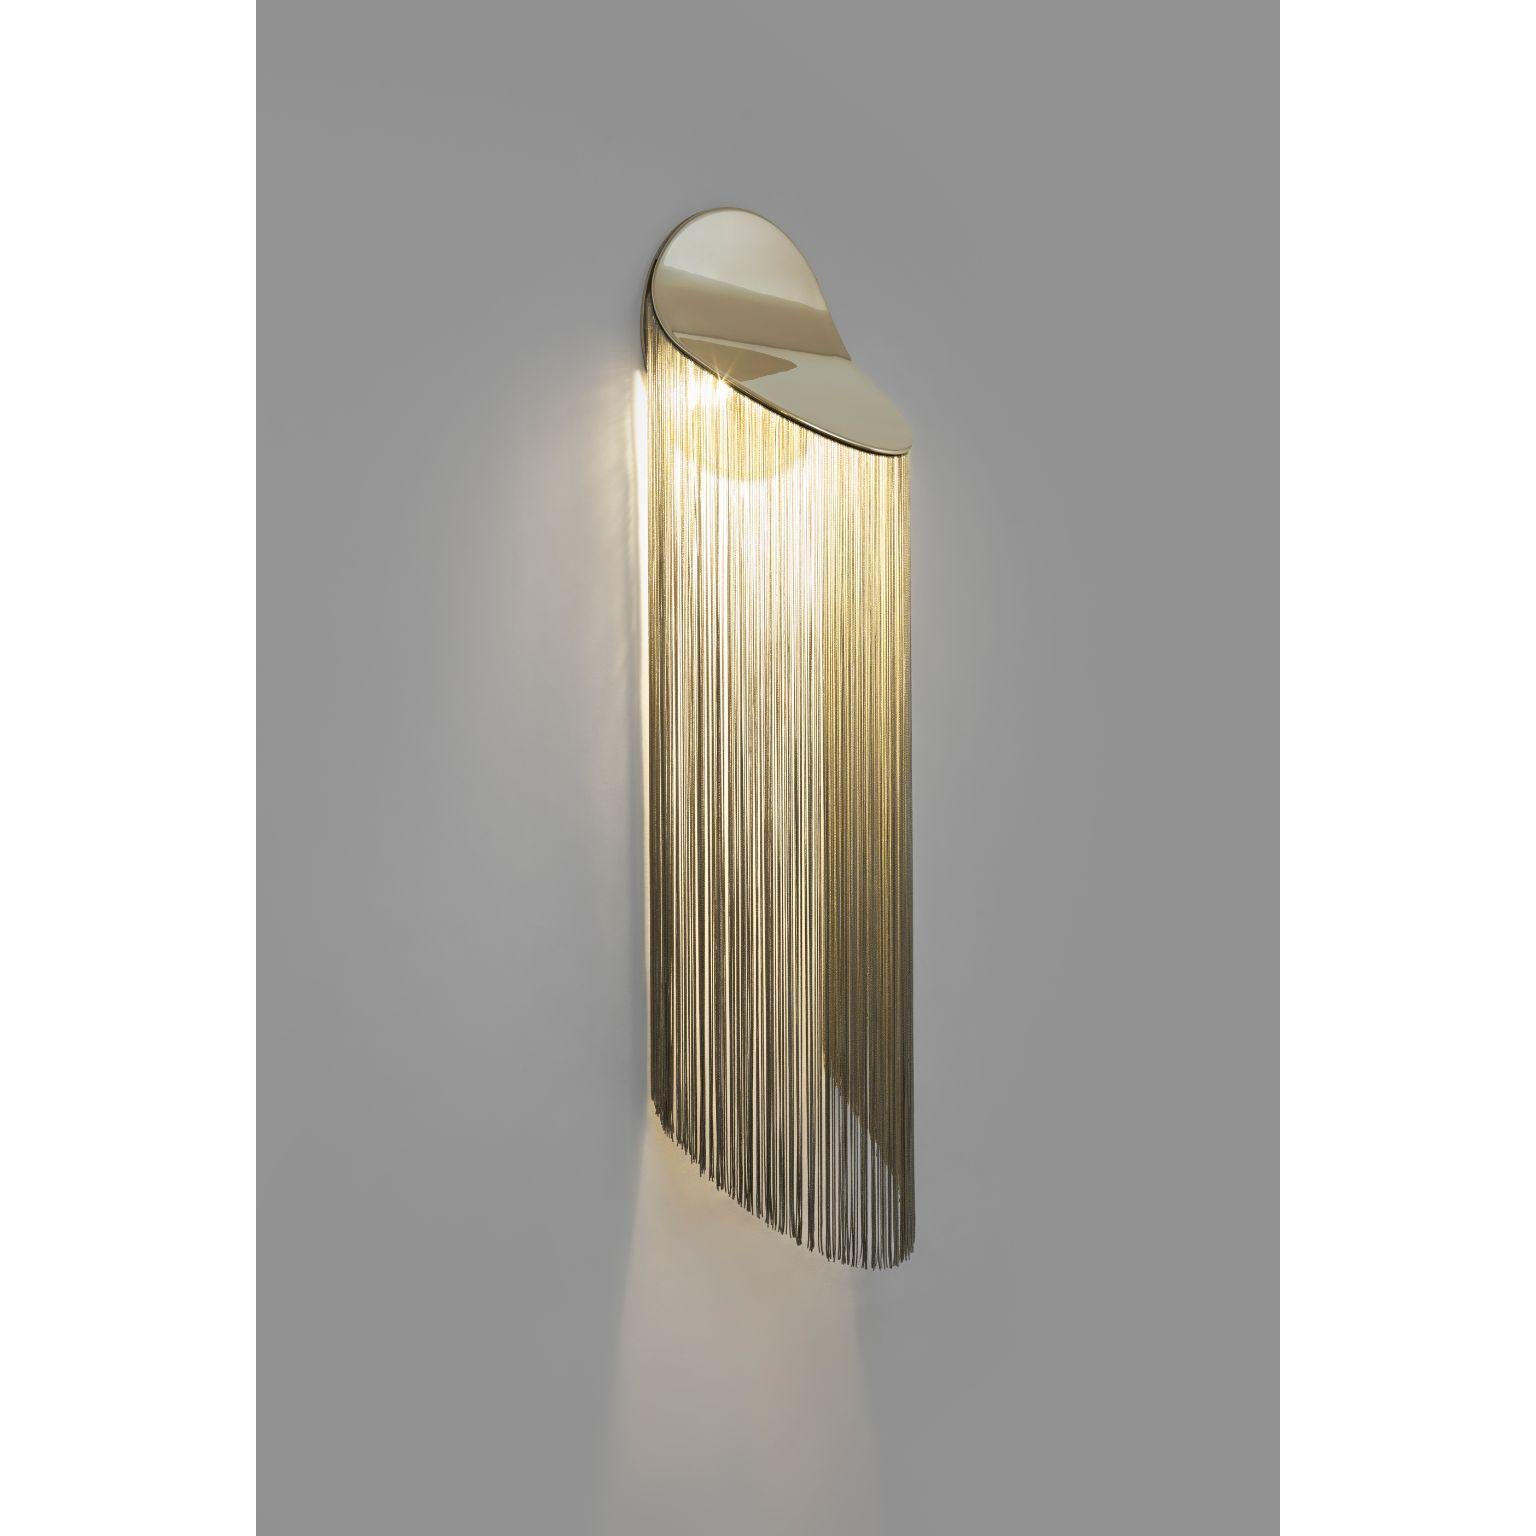 Cé wall lamp by Studio d'Armes
Design by Alexandre Joncas
Dimensions: 25 x 20 x H 100 cm
Materials:  12k Gold Plated Steel, Rayon fringes offered in different colors 
 
Design by Alexandre Joncas
Cé jostles the obvious association between fringes